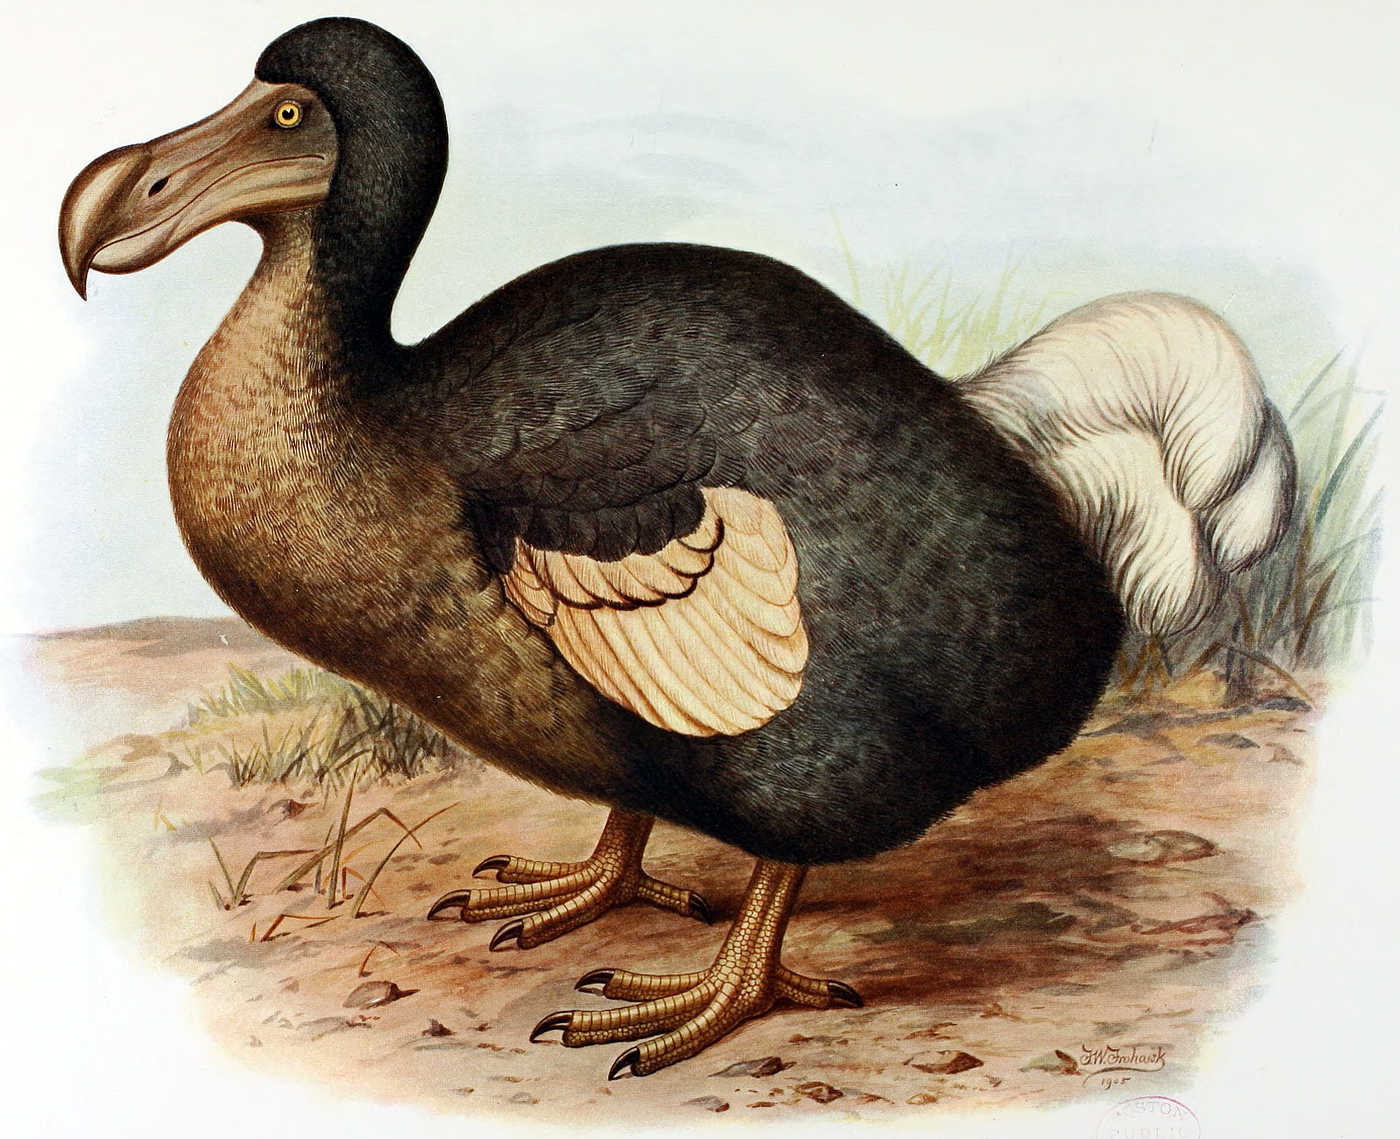 How the Dodos Went Extinct, Fear of the Unknown, and Information Addiction, by Lizzy Burnam 🐞